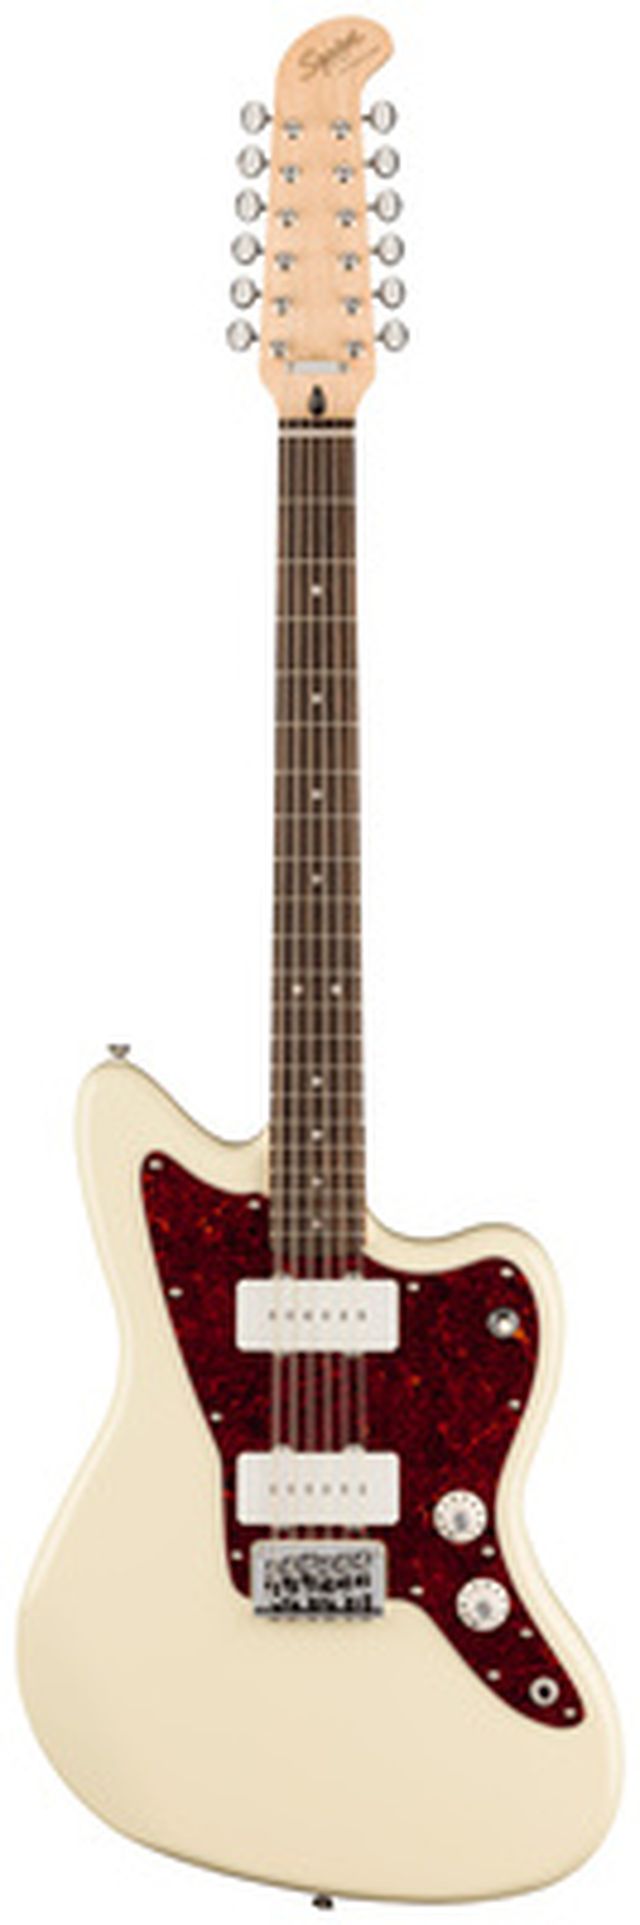 Squier Paranormal Jazzmaster XII OW